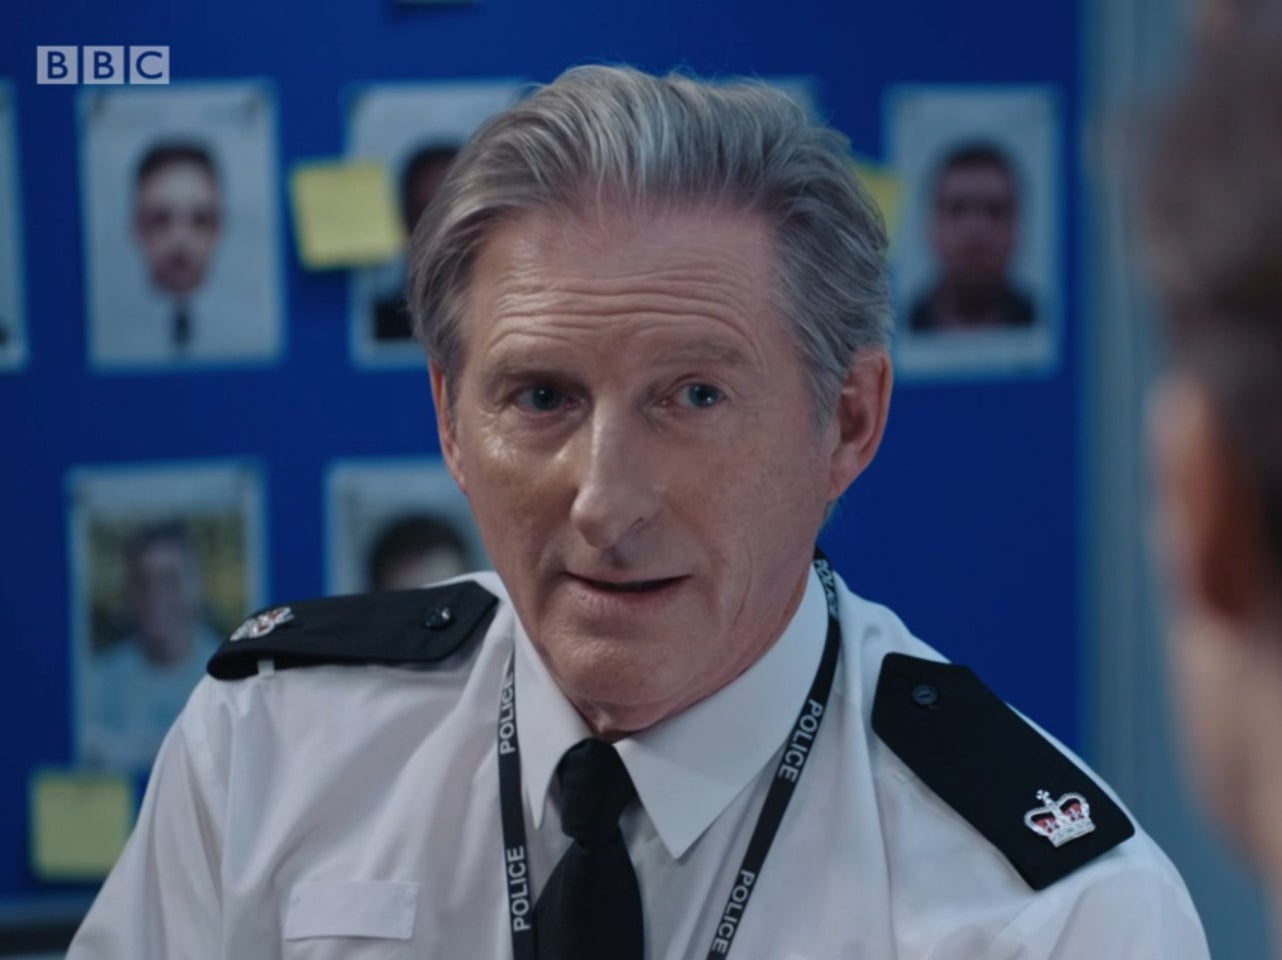 Adrian Dunbar as Ted Hastings in the latest series of ‘Line of Duty’